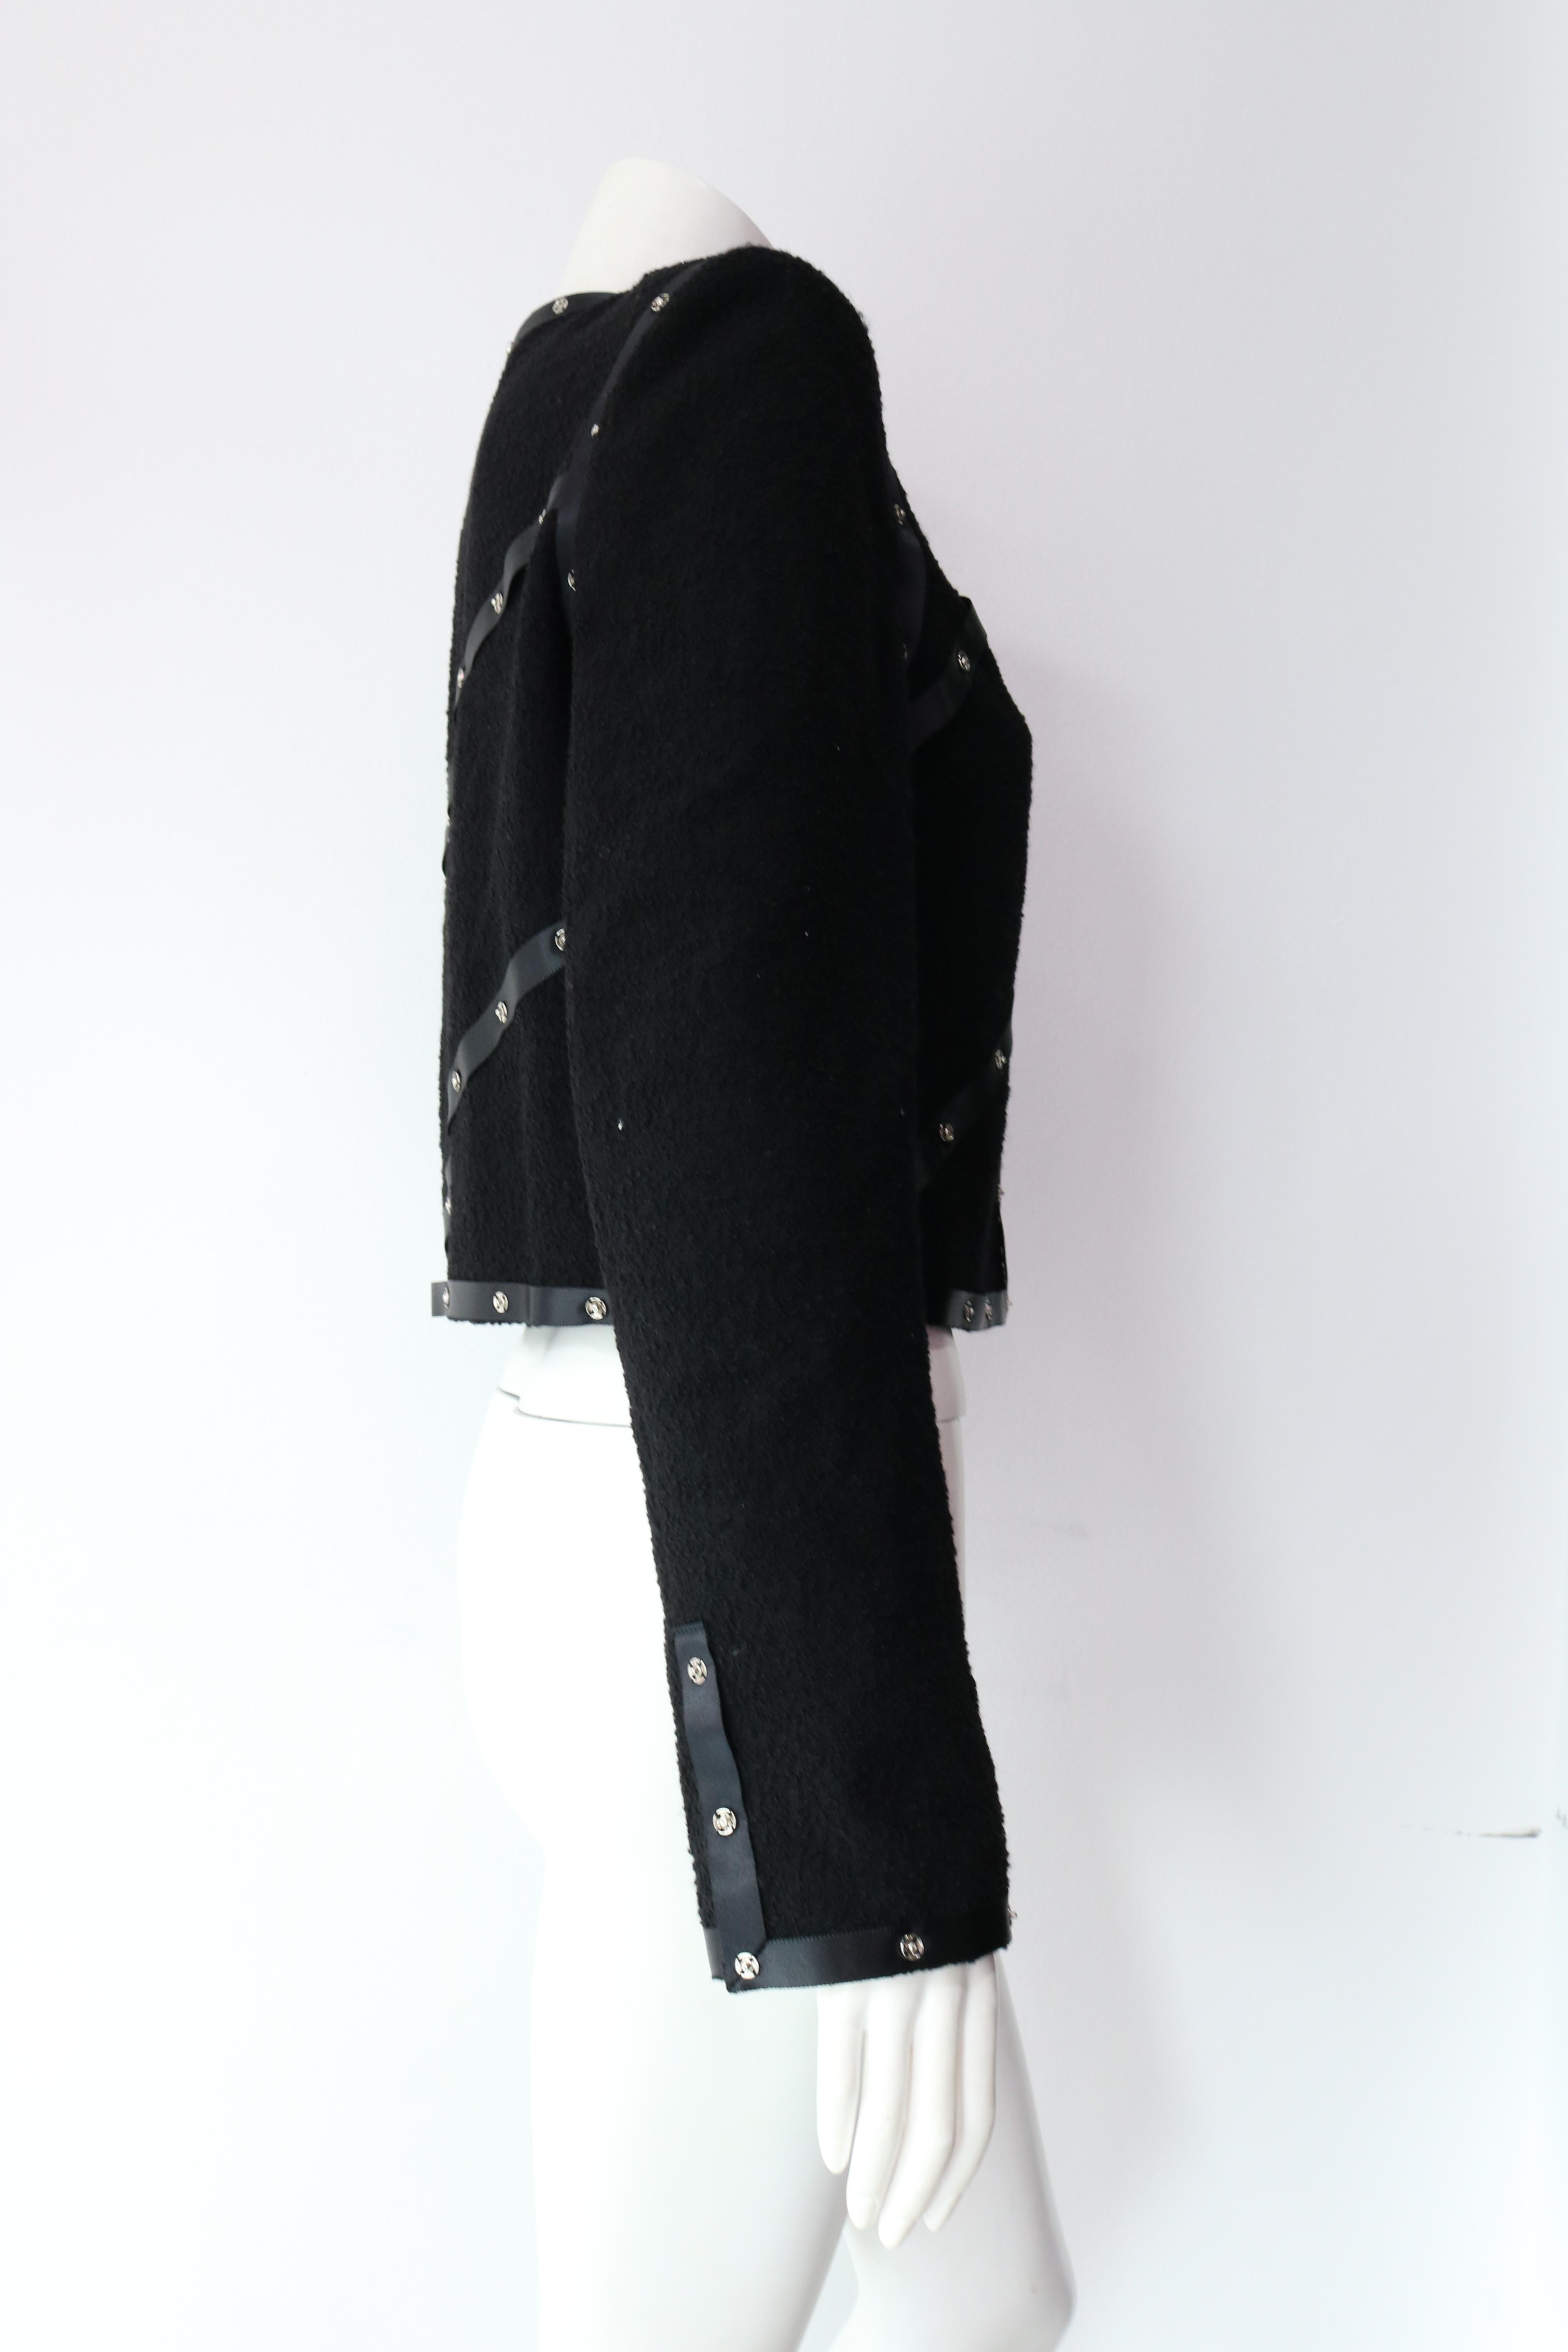 Chanel Black Embellished Jacket  with silver grommets Size M FALL 2003 4